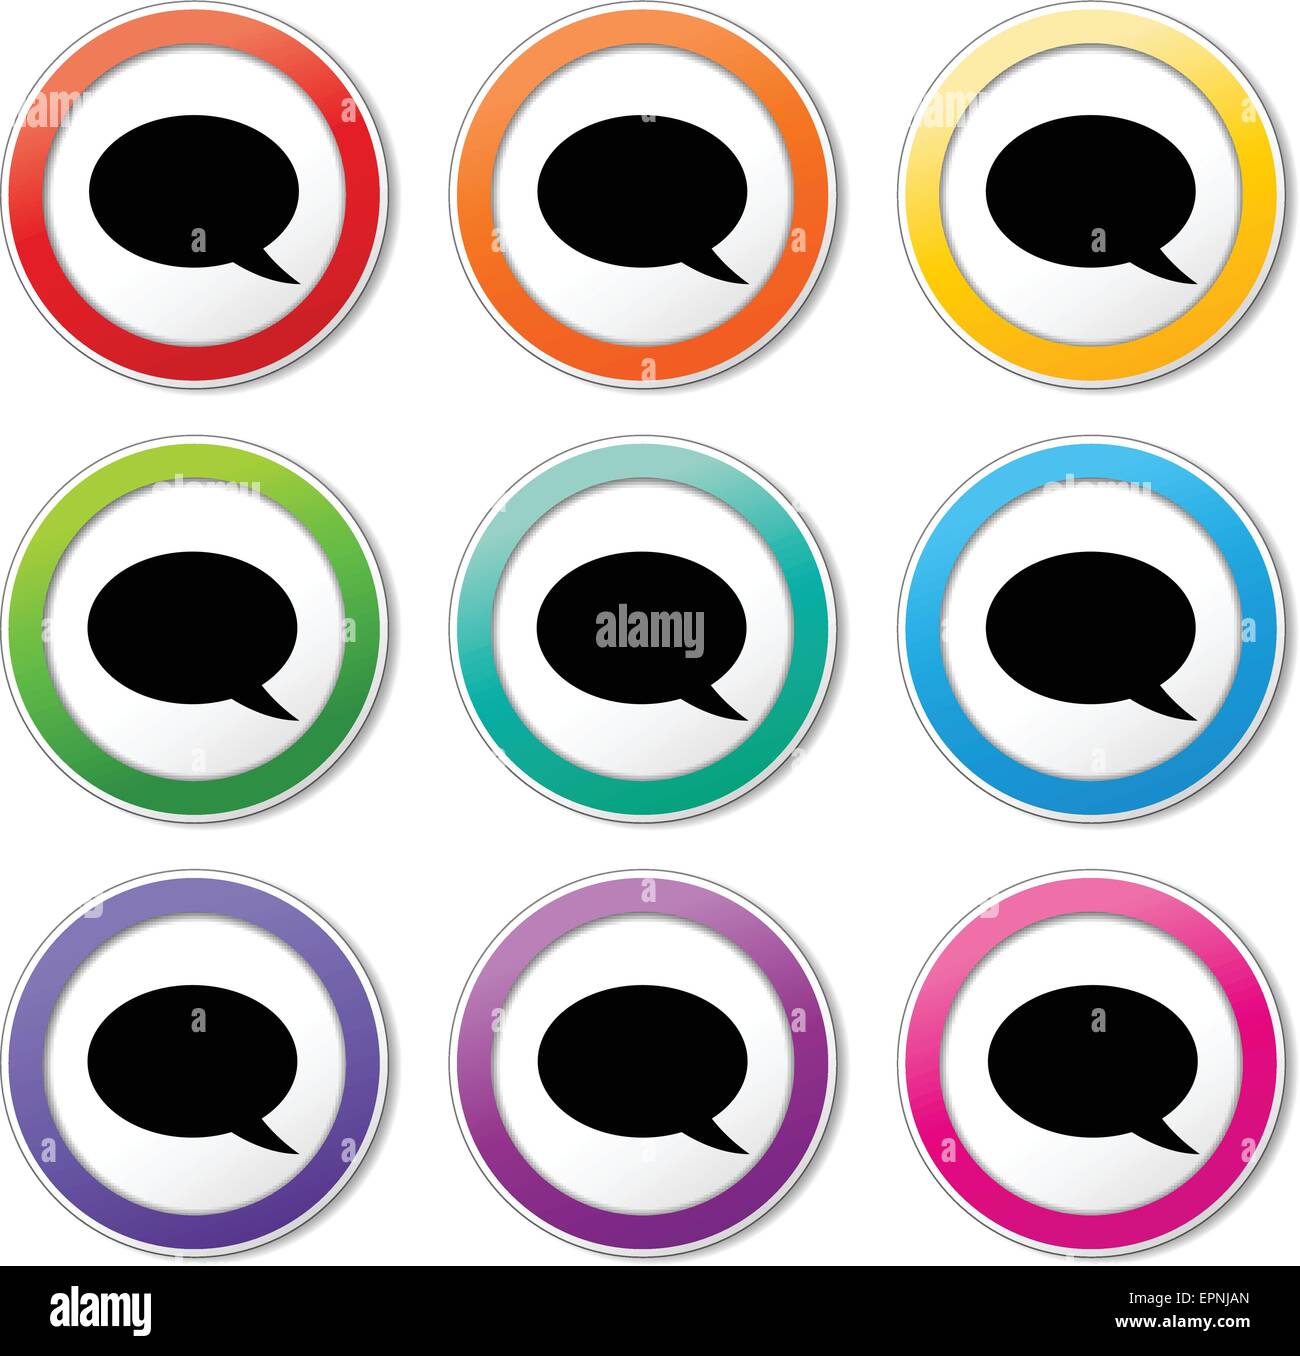 illustration of various color set of speech bubble icons Stock Vector